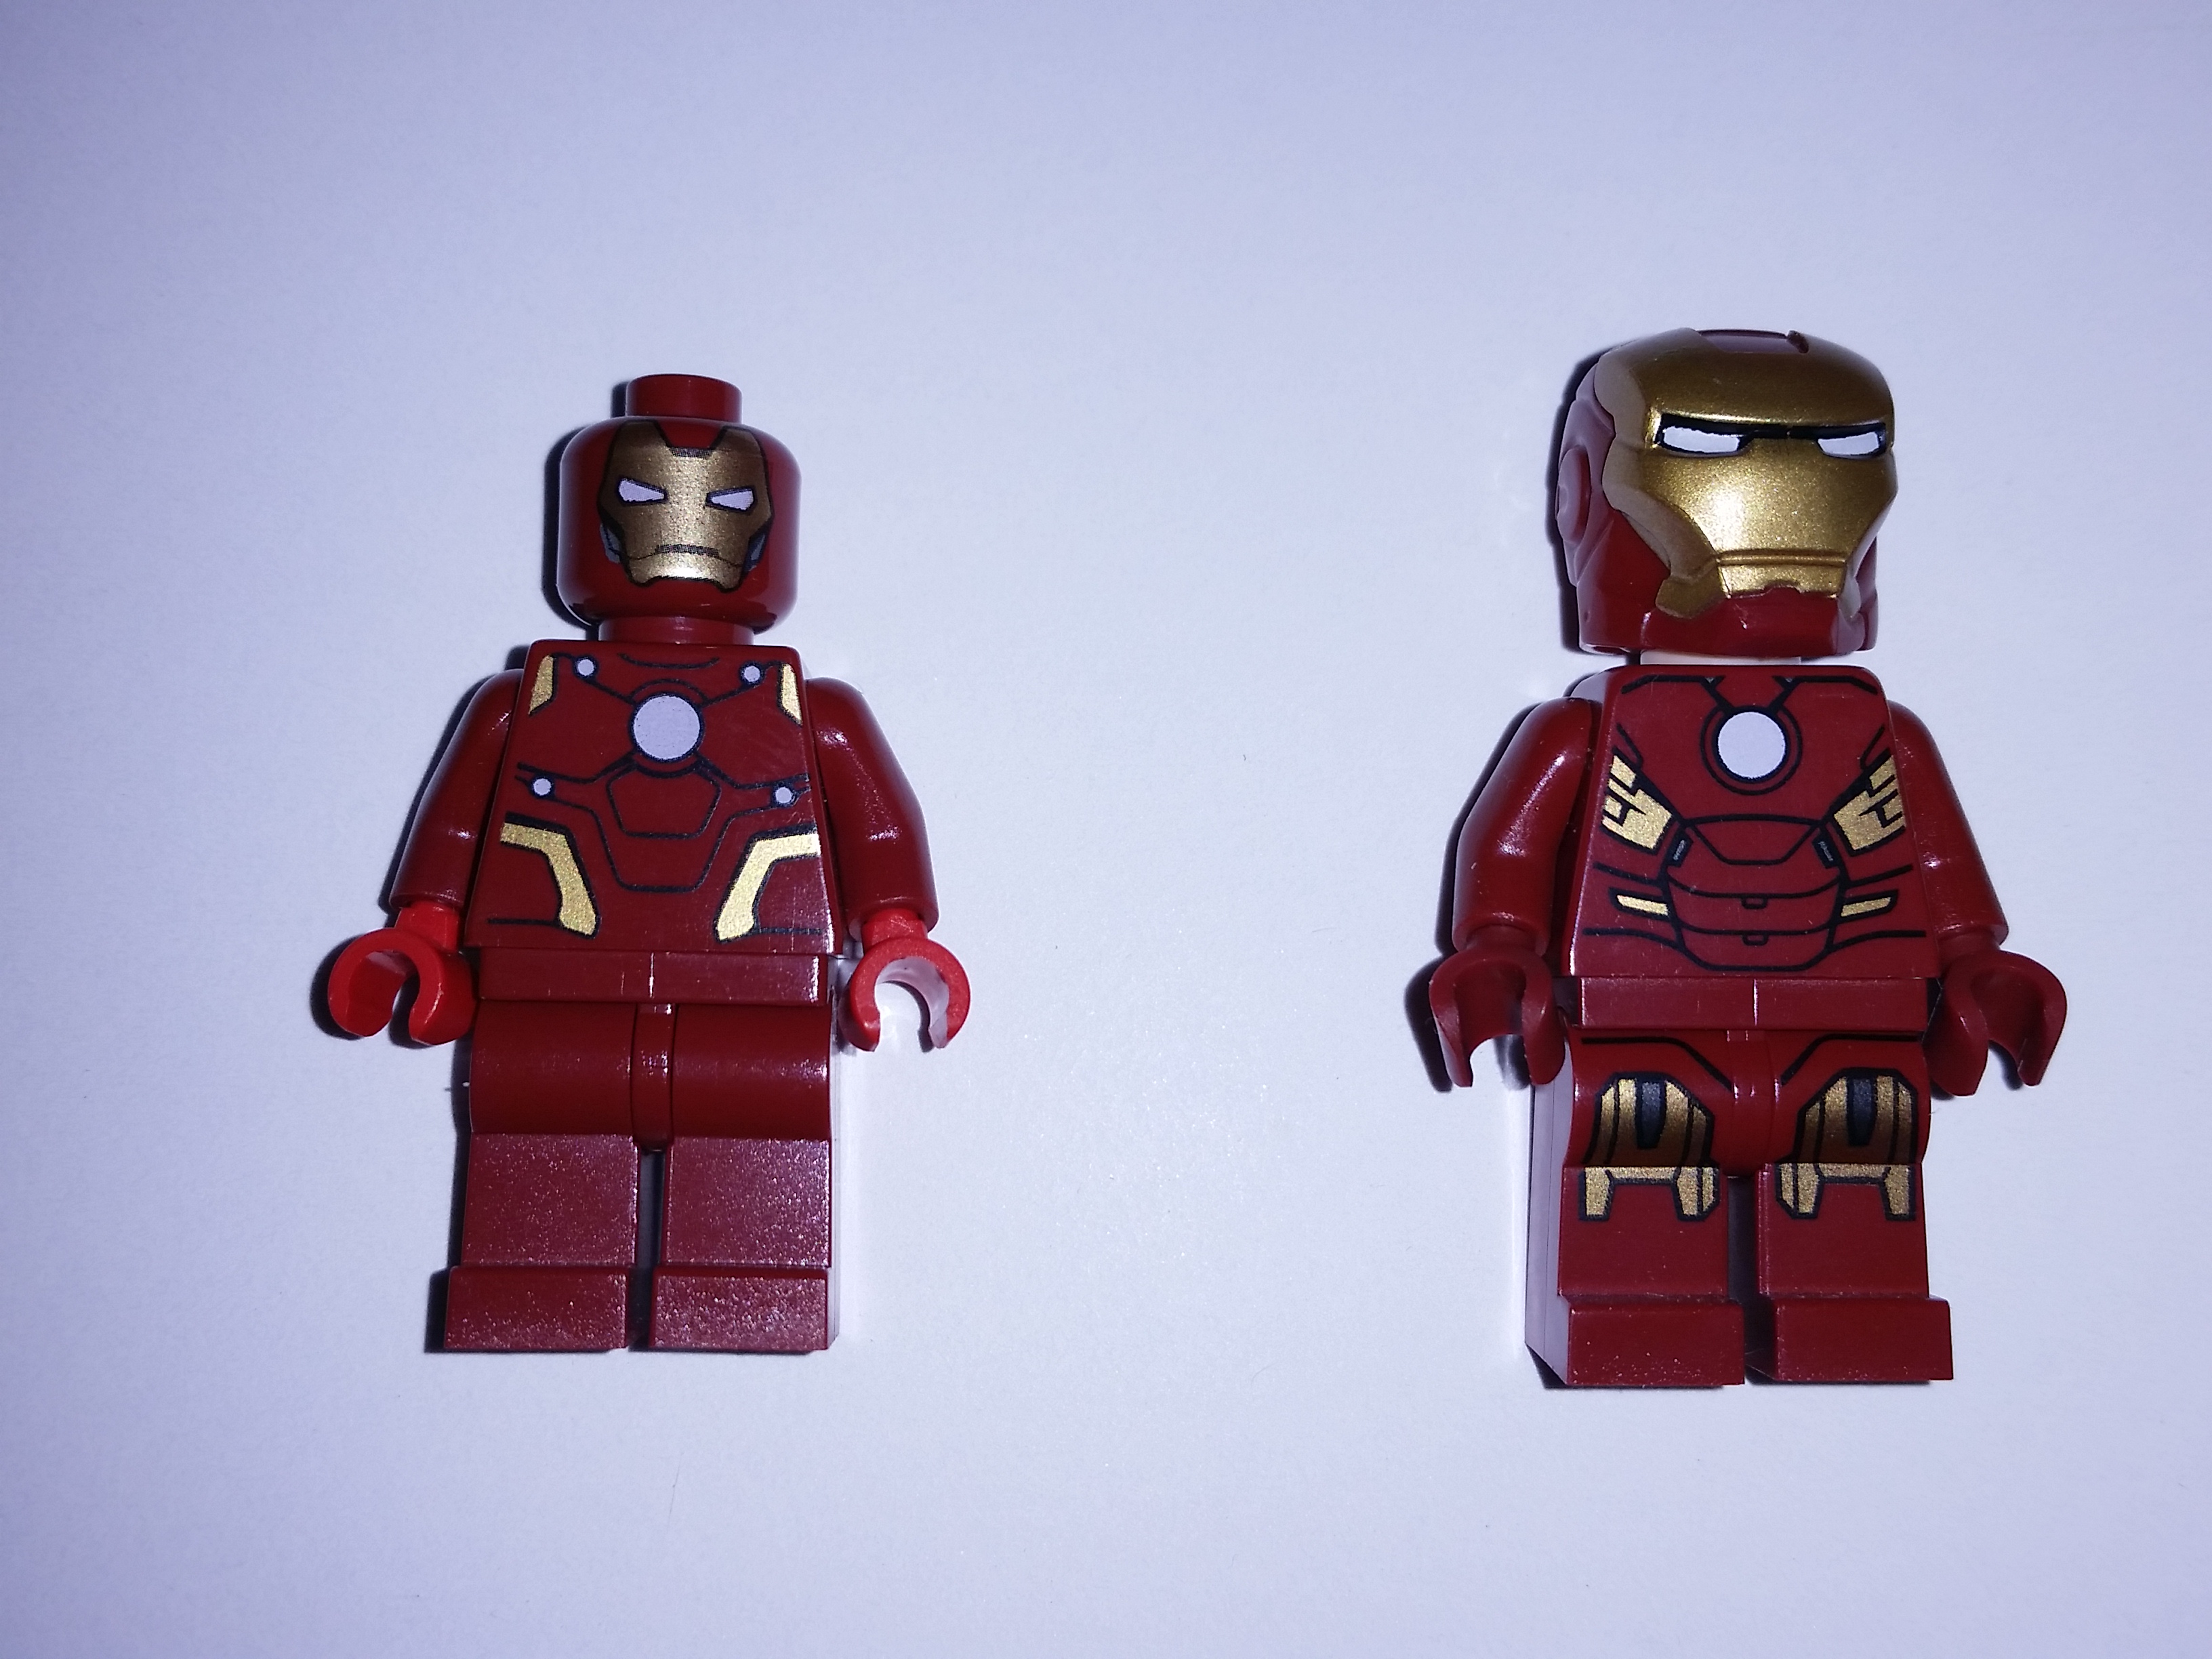 New York Lego Toy Fair Exclusive Captain America and Iron Man Minifigure Details - Minifigure Price Guide